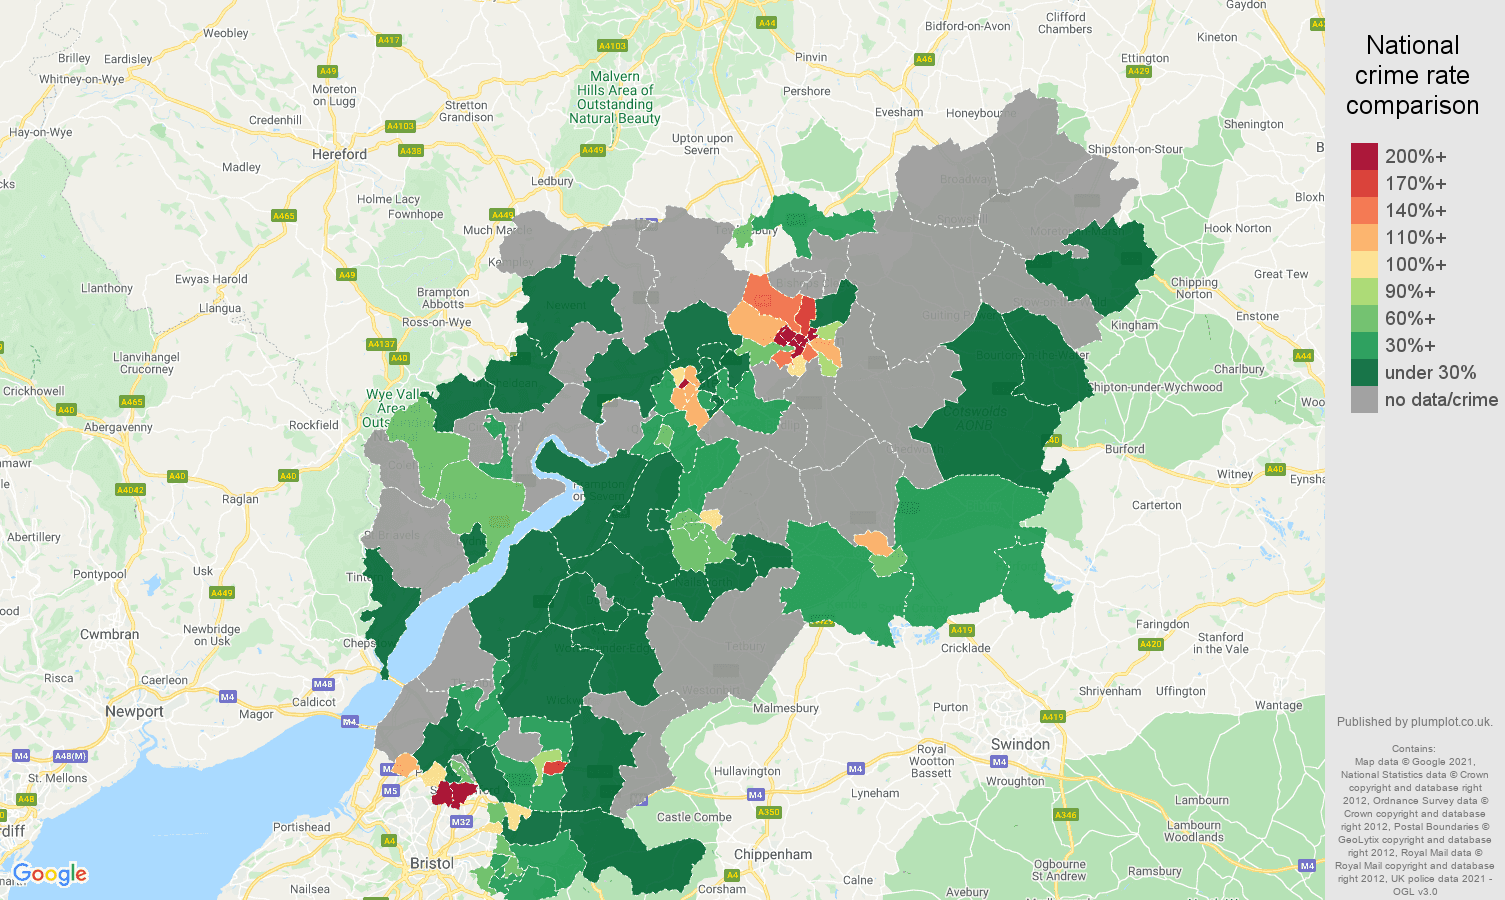 Gloucestershire bicycle theft crime rate comparison map